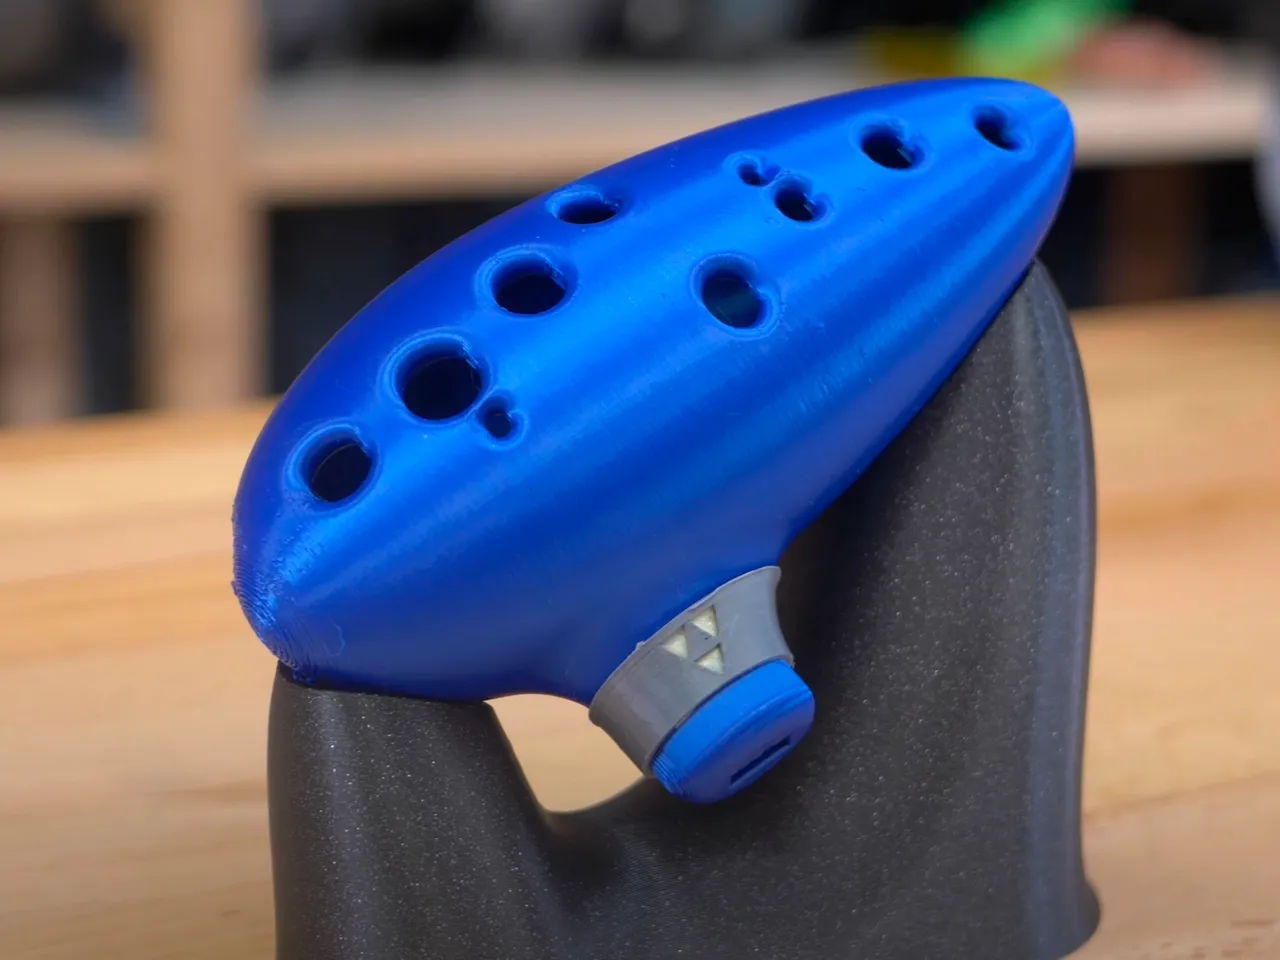  12 Hole Ocarina From the Legend of Zelda By STL Ocarina :  Musical Instruments